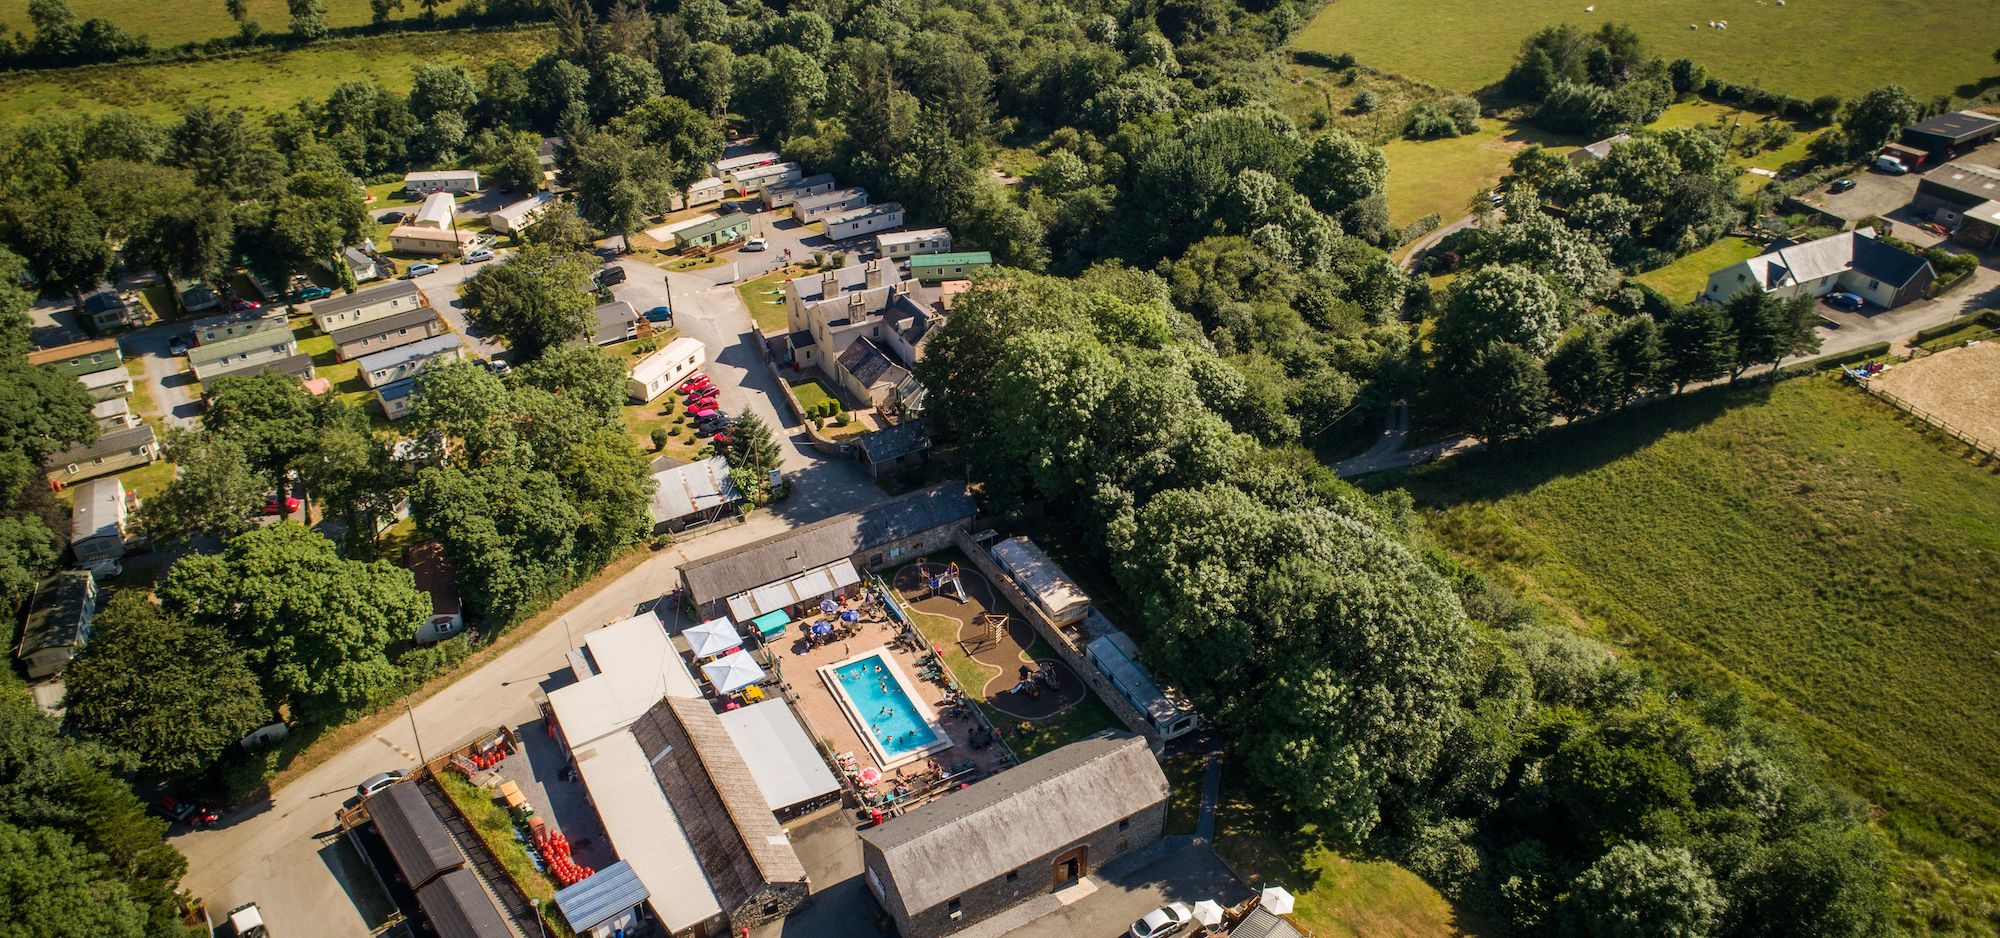 Grondre Holiday Park